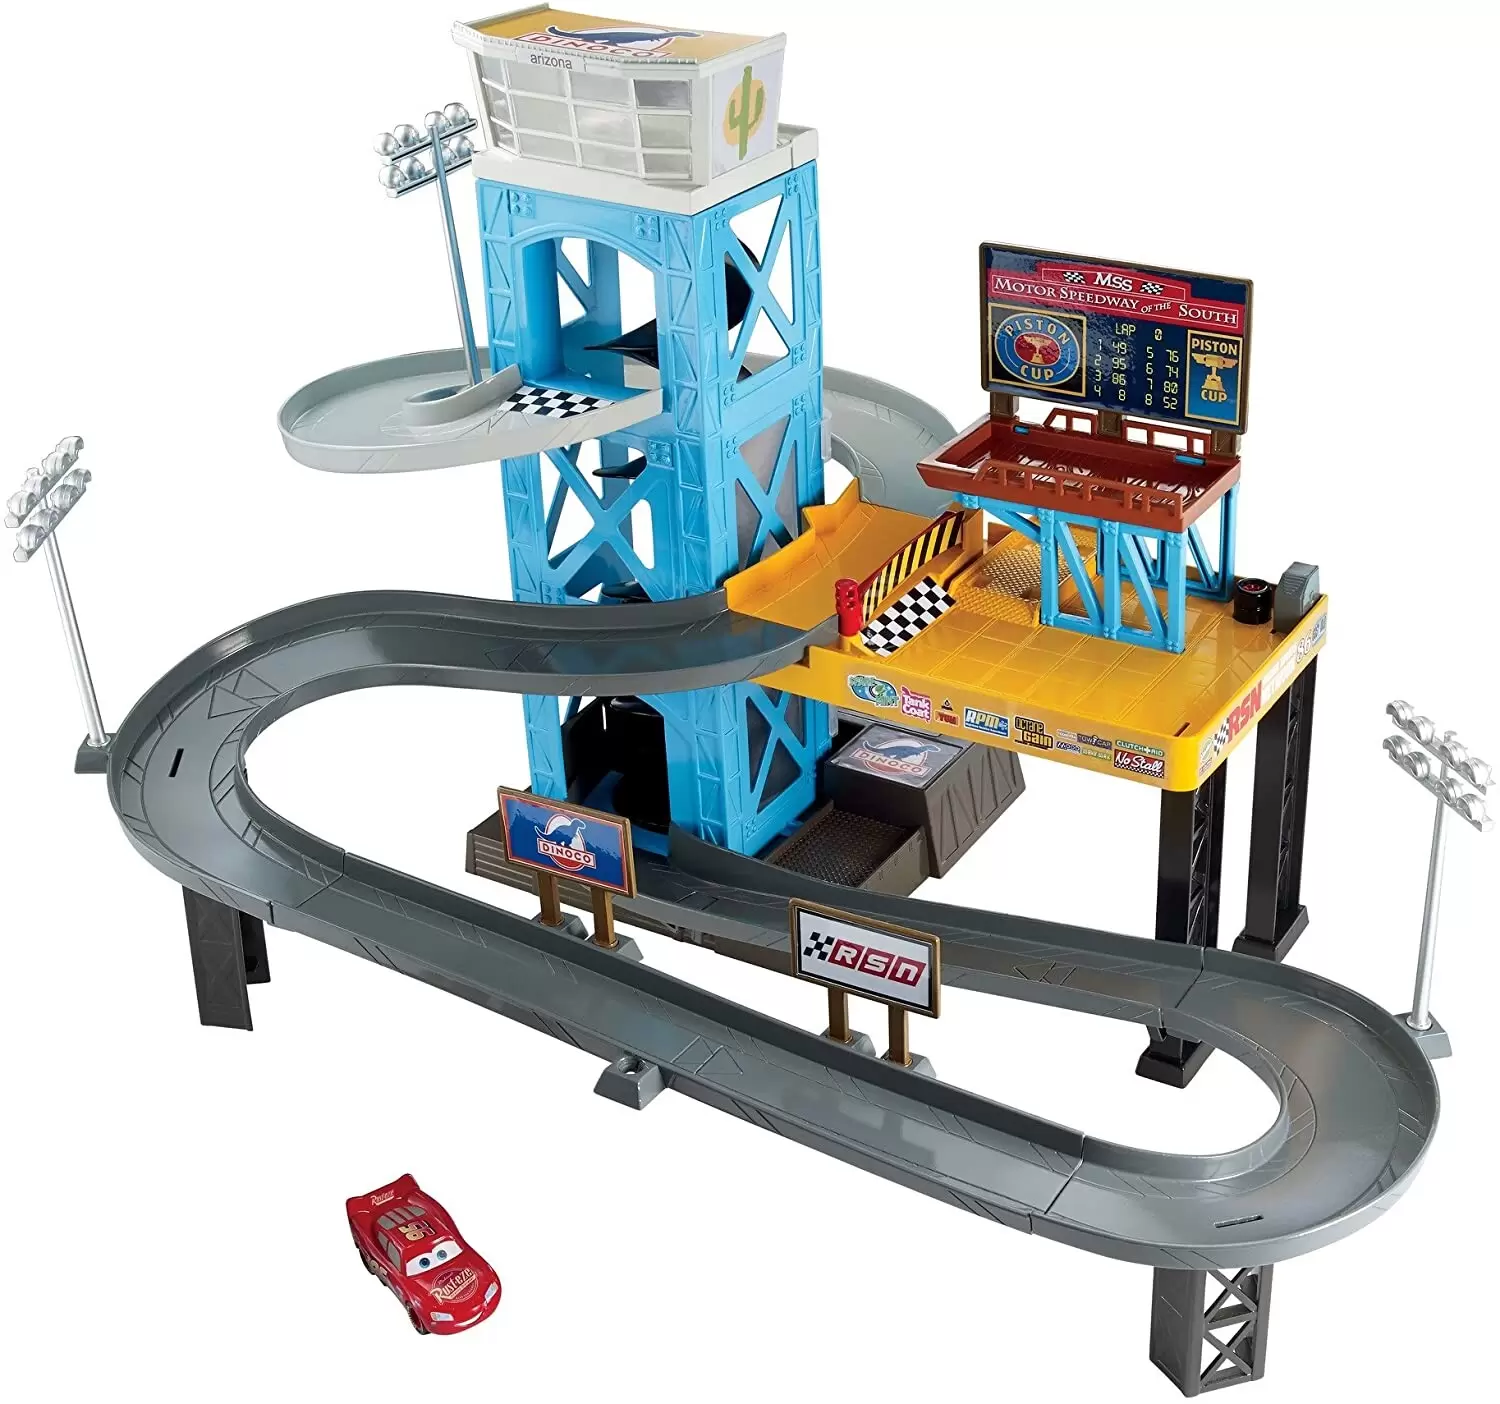 Cars - Playsets - Piston Cup Motorized Garage